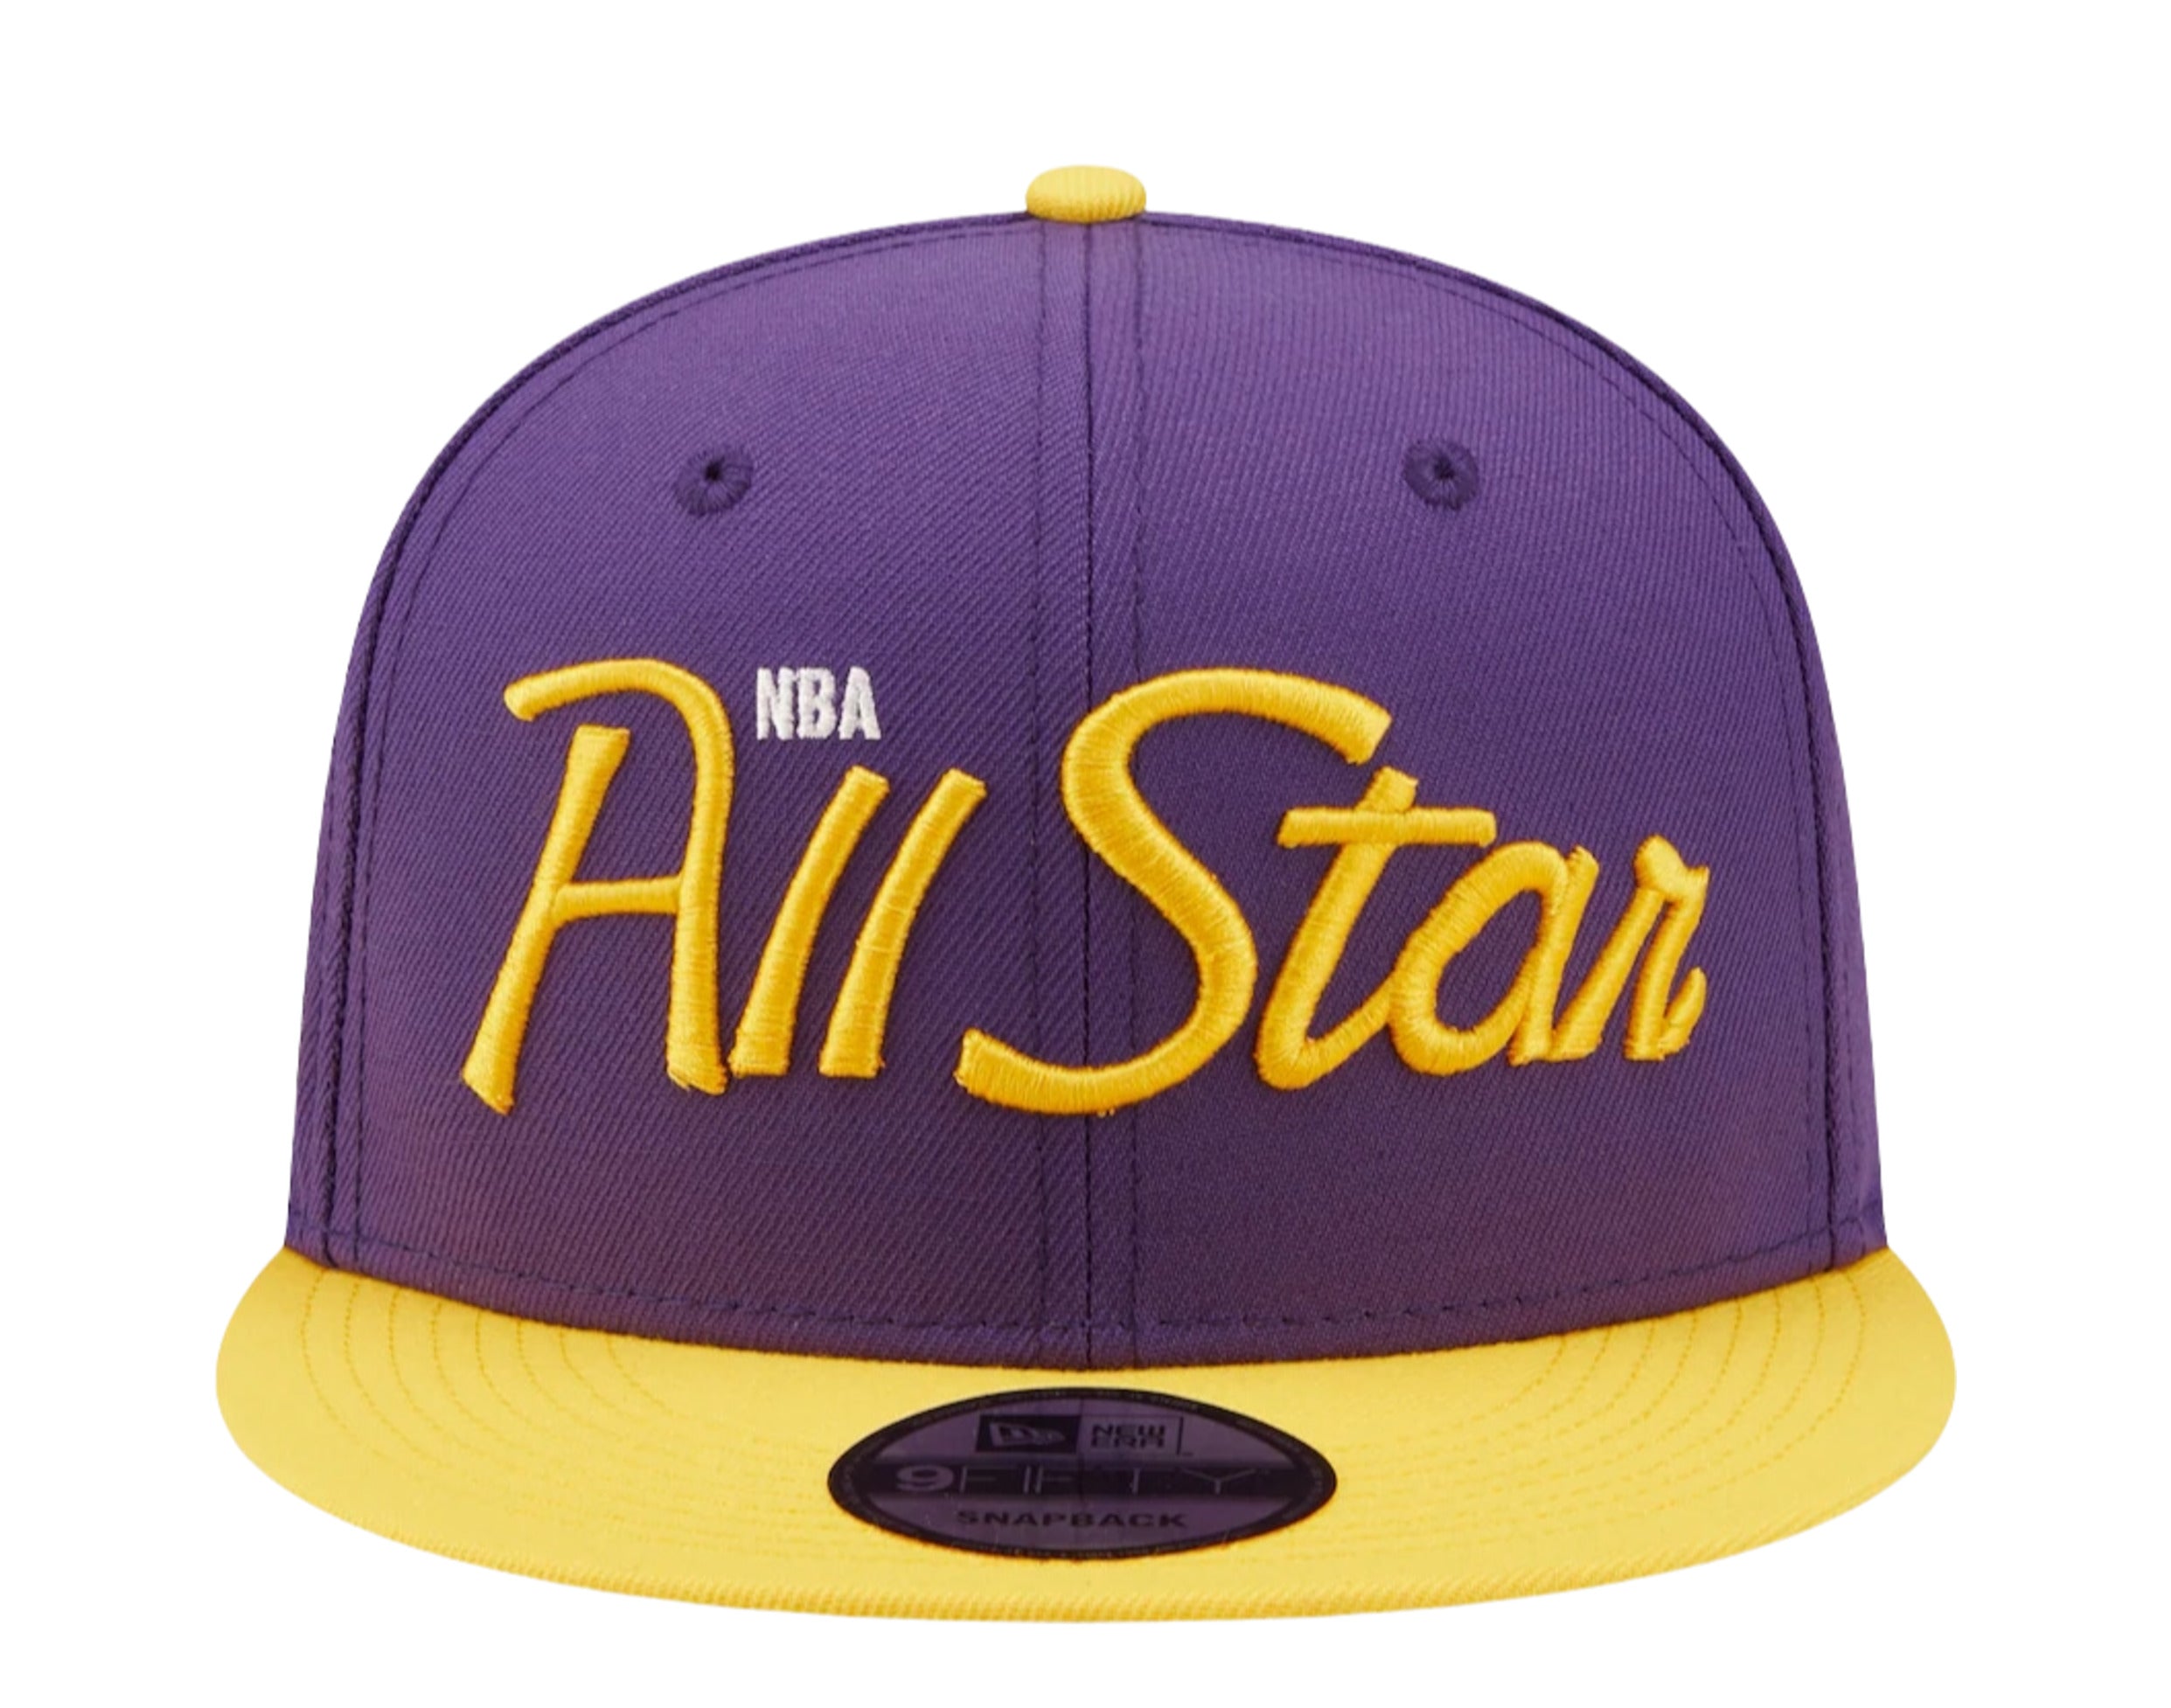 Mitchell and Ness Los Angeles Lakers Snapback - Black - New Star